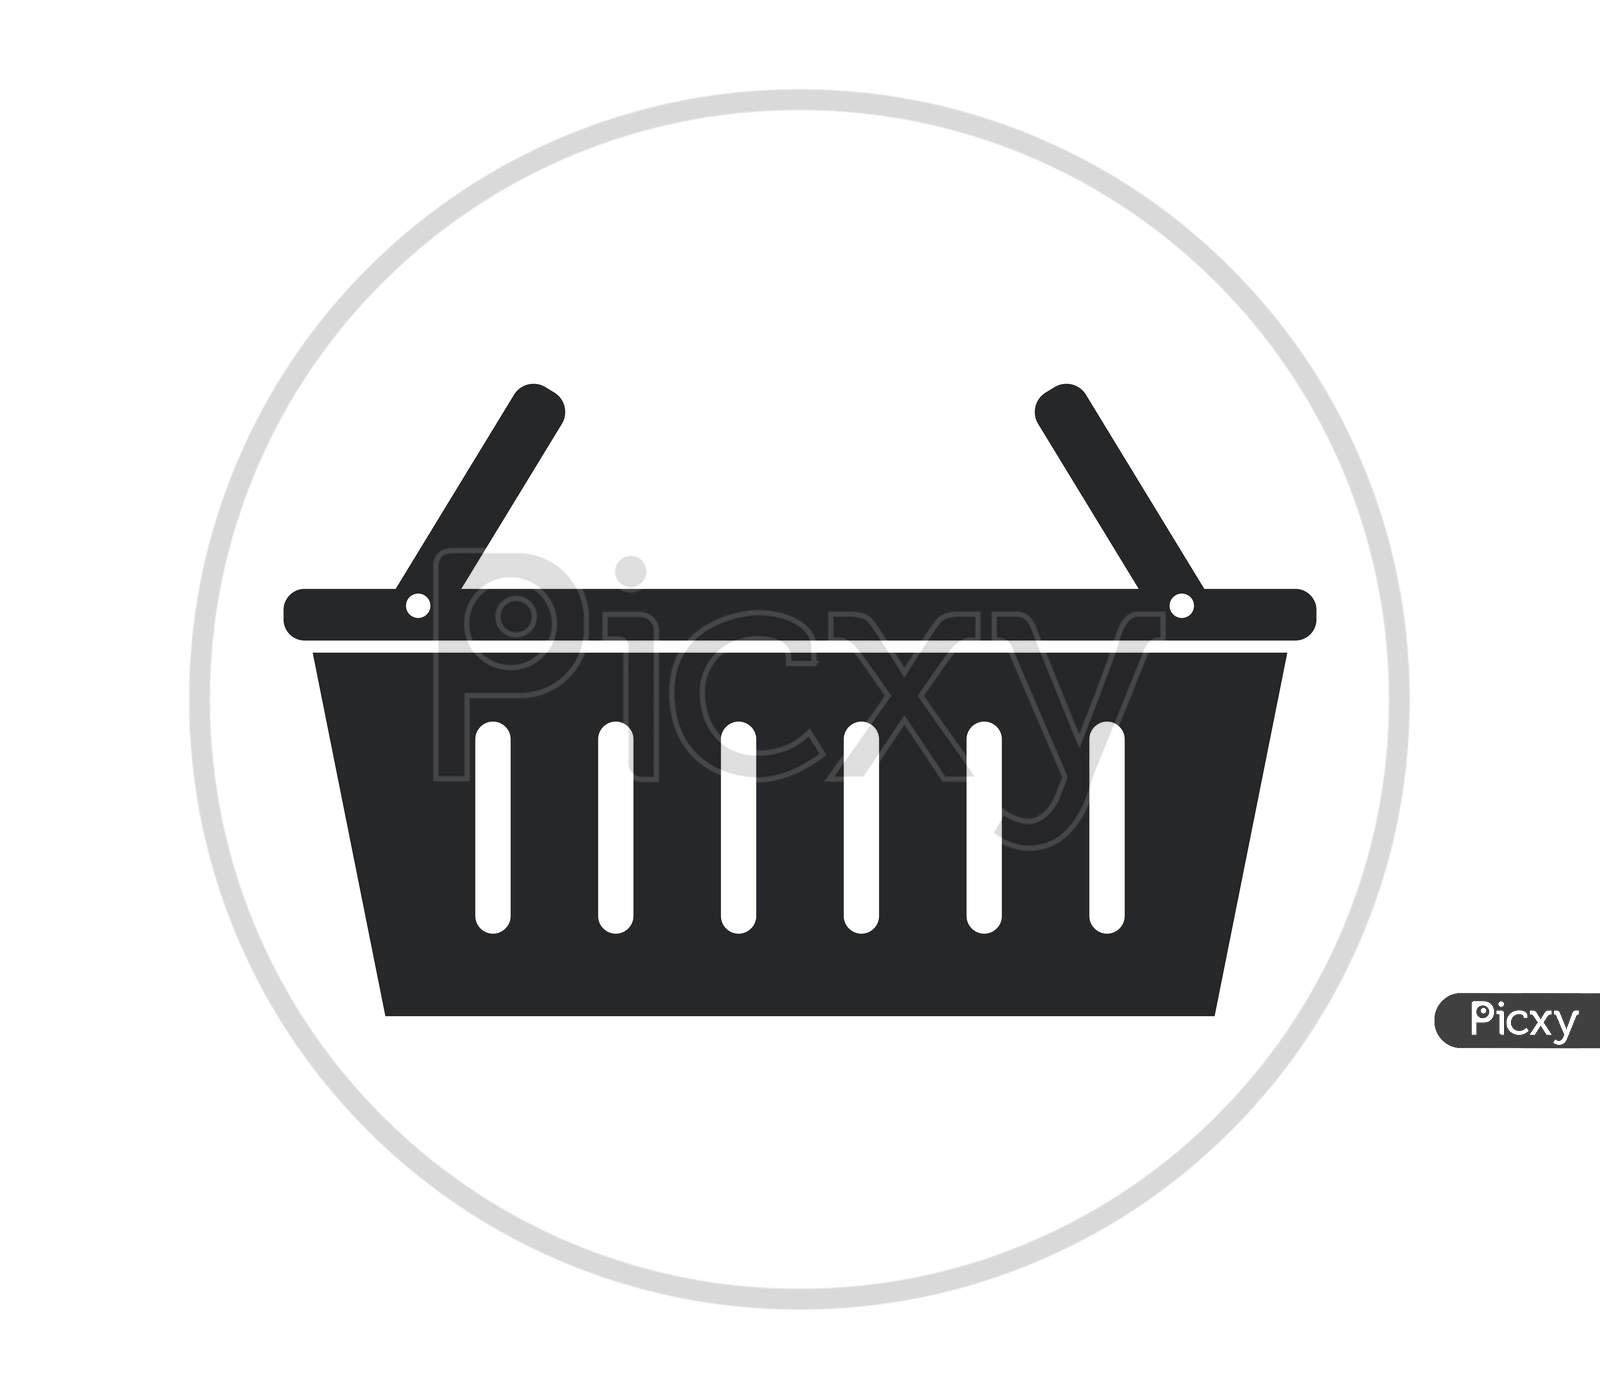 Basket Icon Illustrated In Vector On White Background